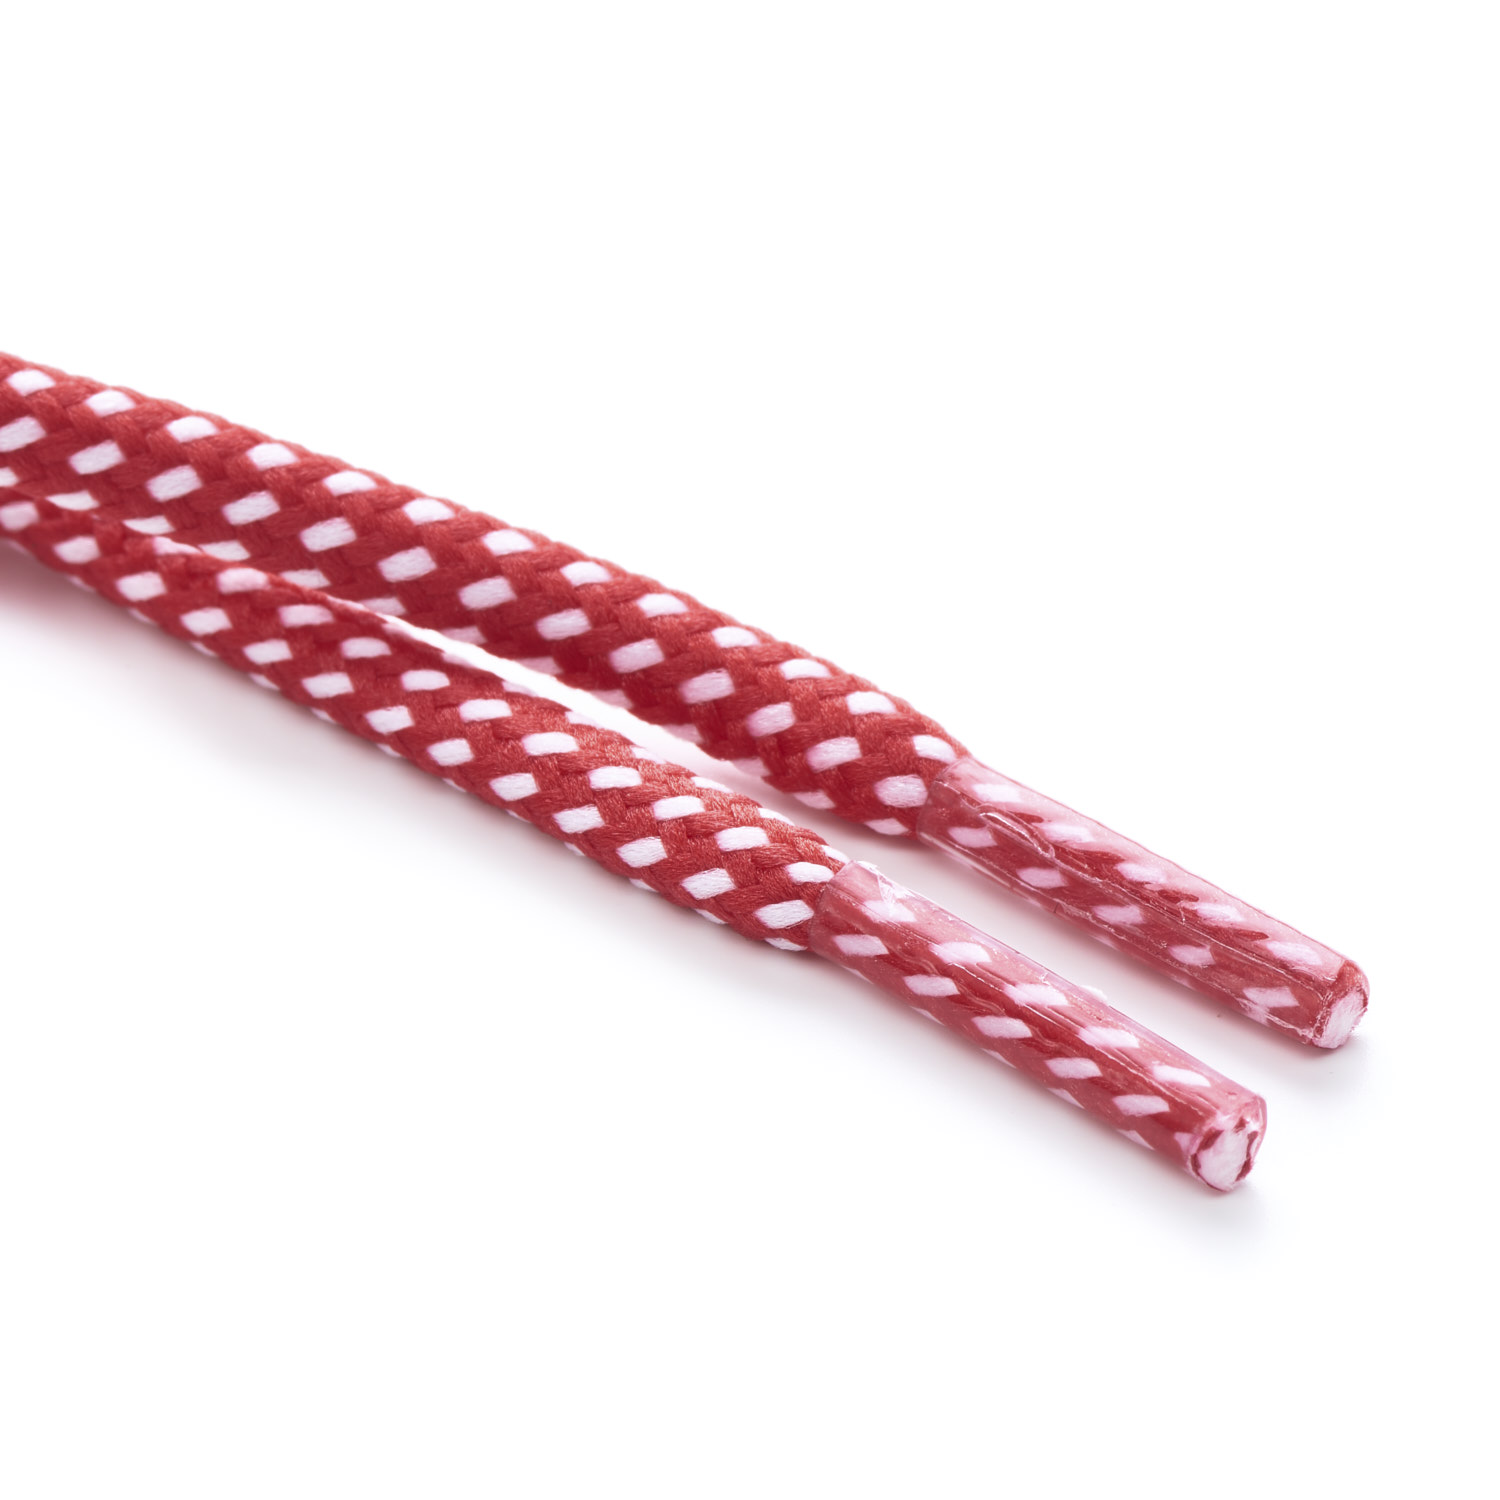 5mm Round Cord Fleck Shoe Laces Red with White